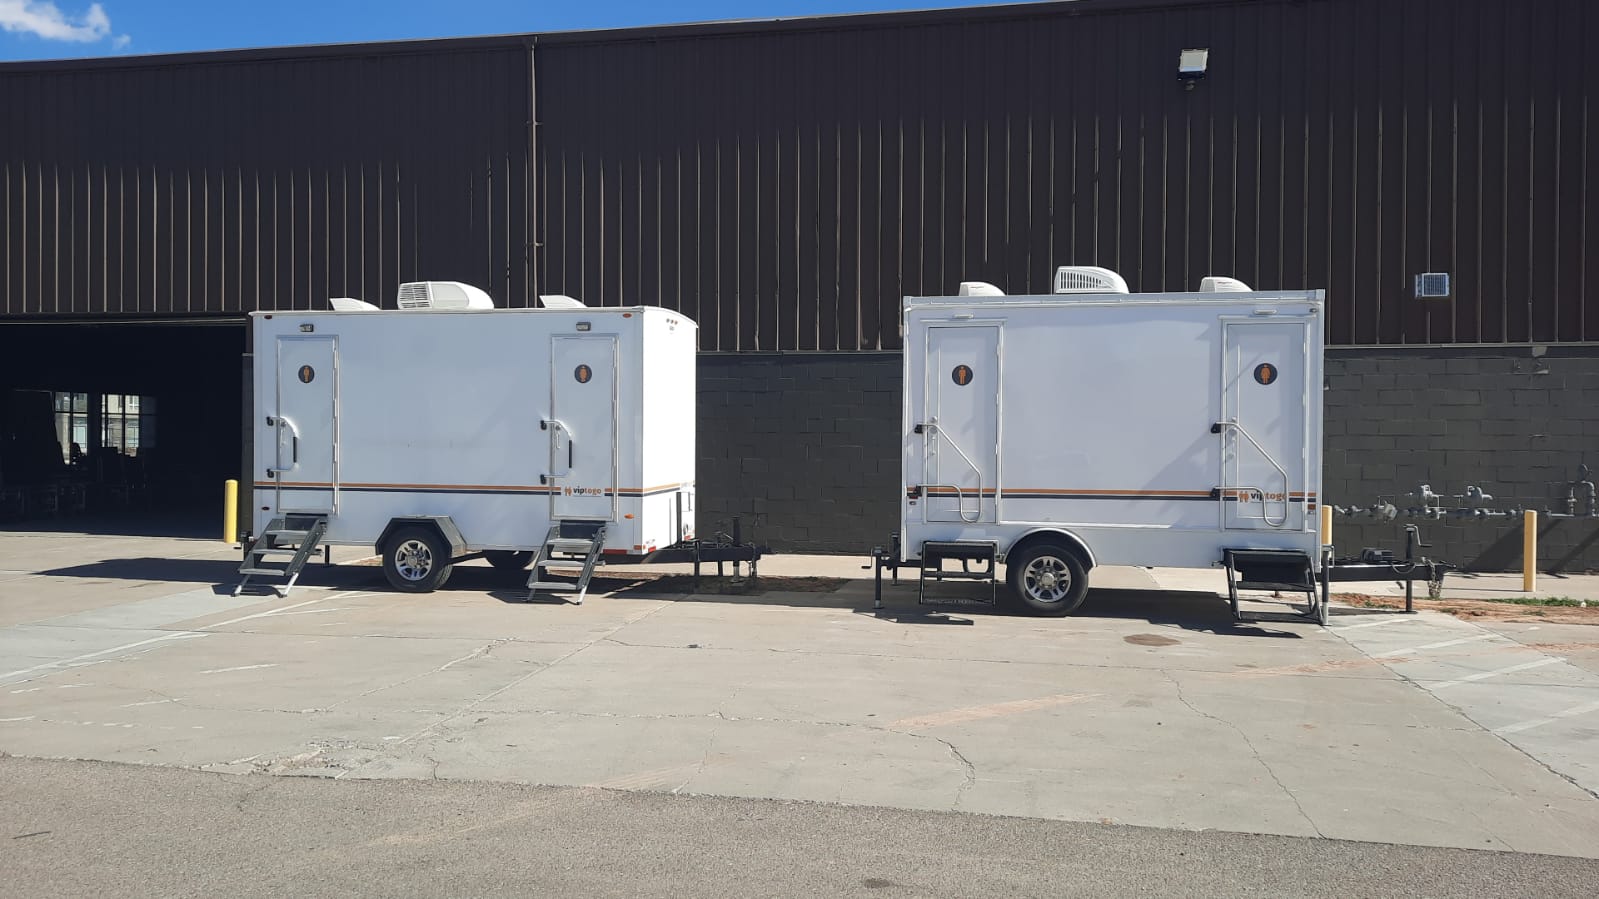 2-station restroom trailers for Virginia needs